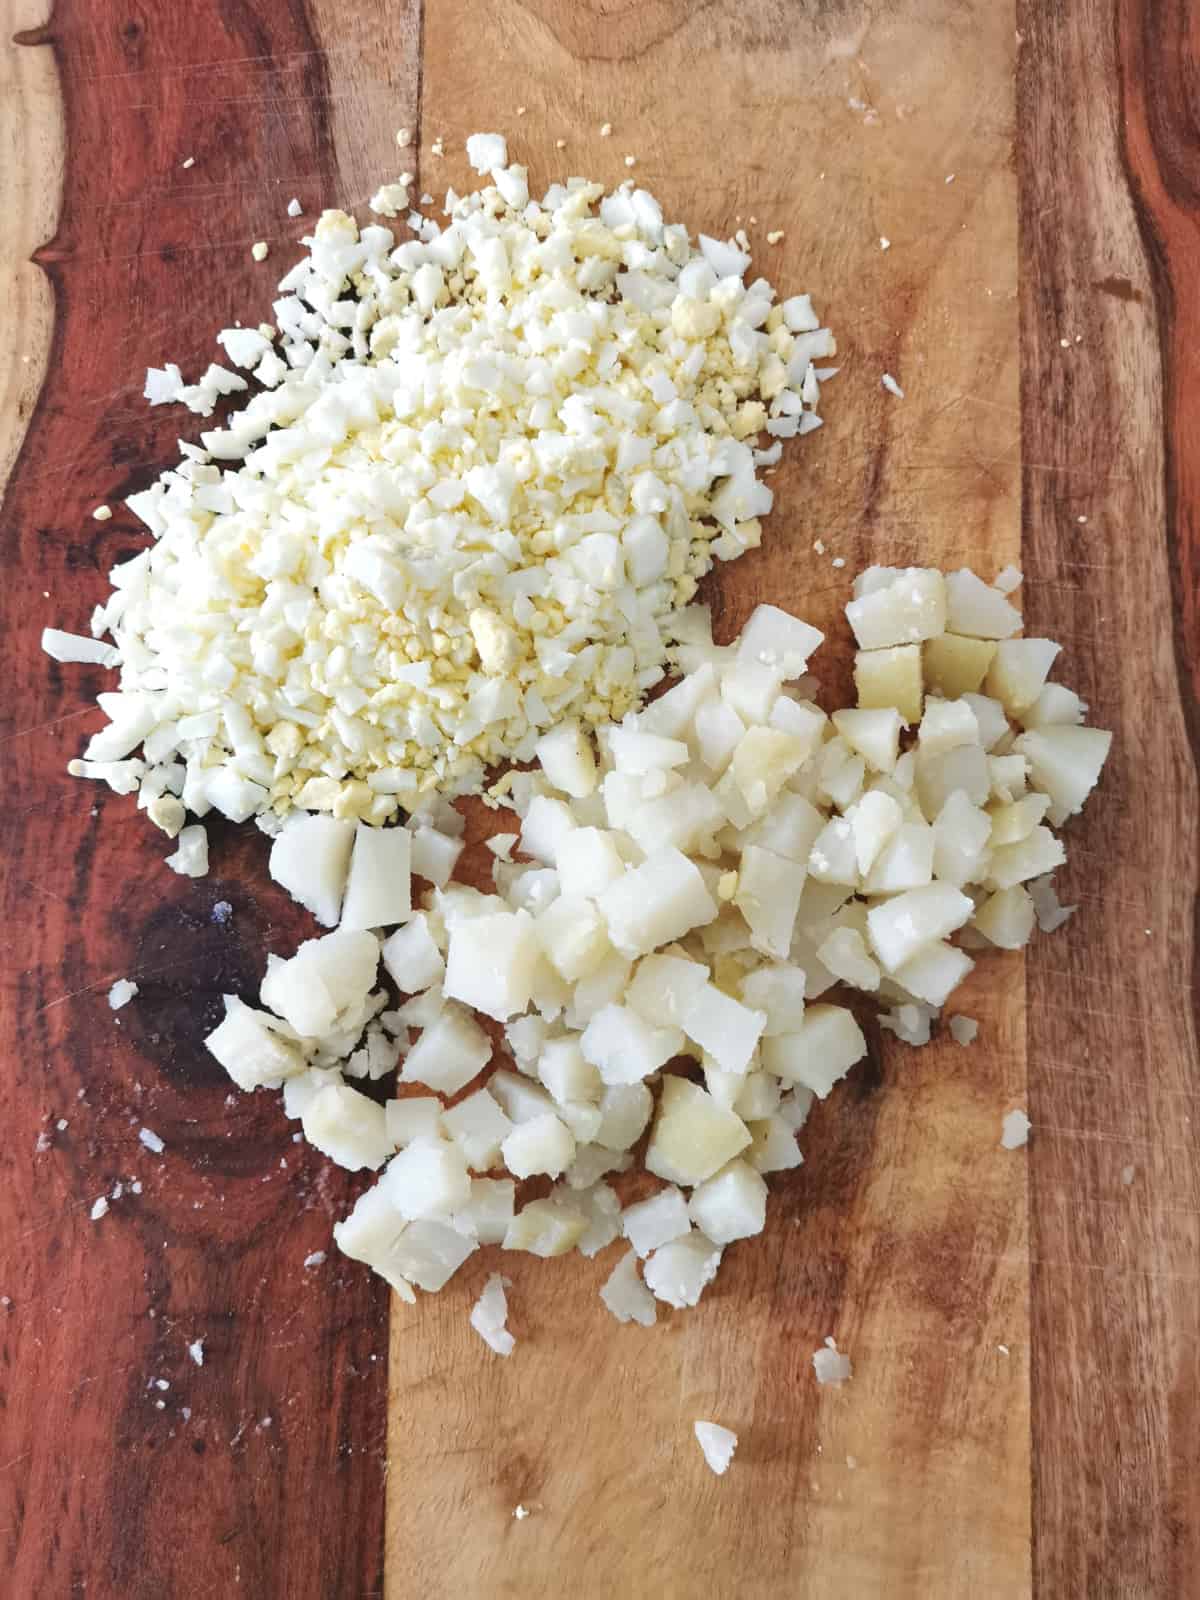 diced potatoes and chopped eggs on a cutting board.